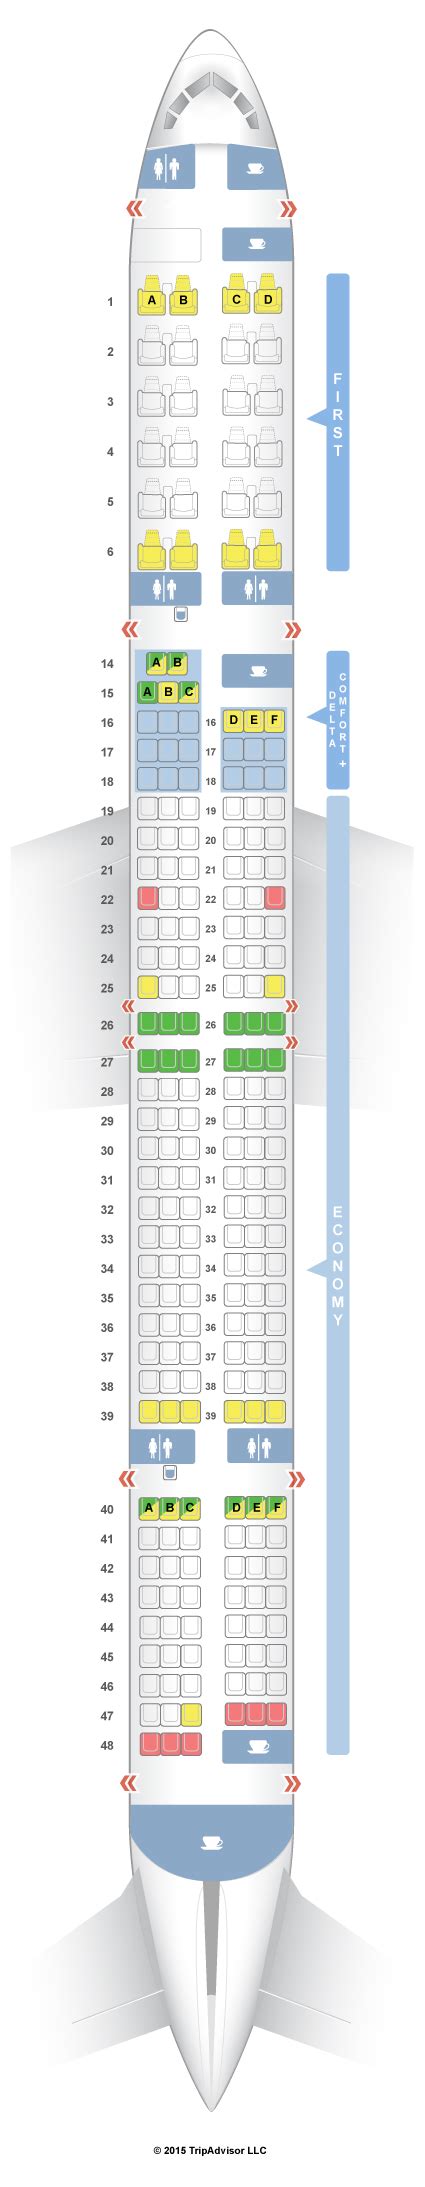 Seatlink's take. The Delta Airlines Boeing 757-200 features 199 seats in a 3 cabin configuration. Economy has 150 seats in a 3-3 config; Premium economy has 29 seats in a 3-3 config; First class has 20 seats in a 2-2 config; this is pretty standard for these aircraft.. 